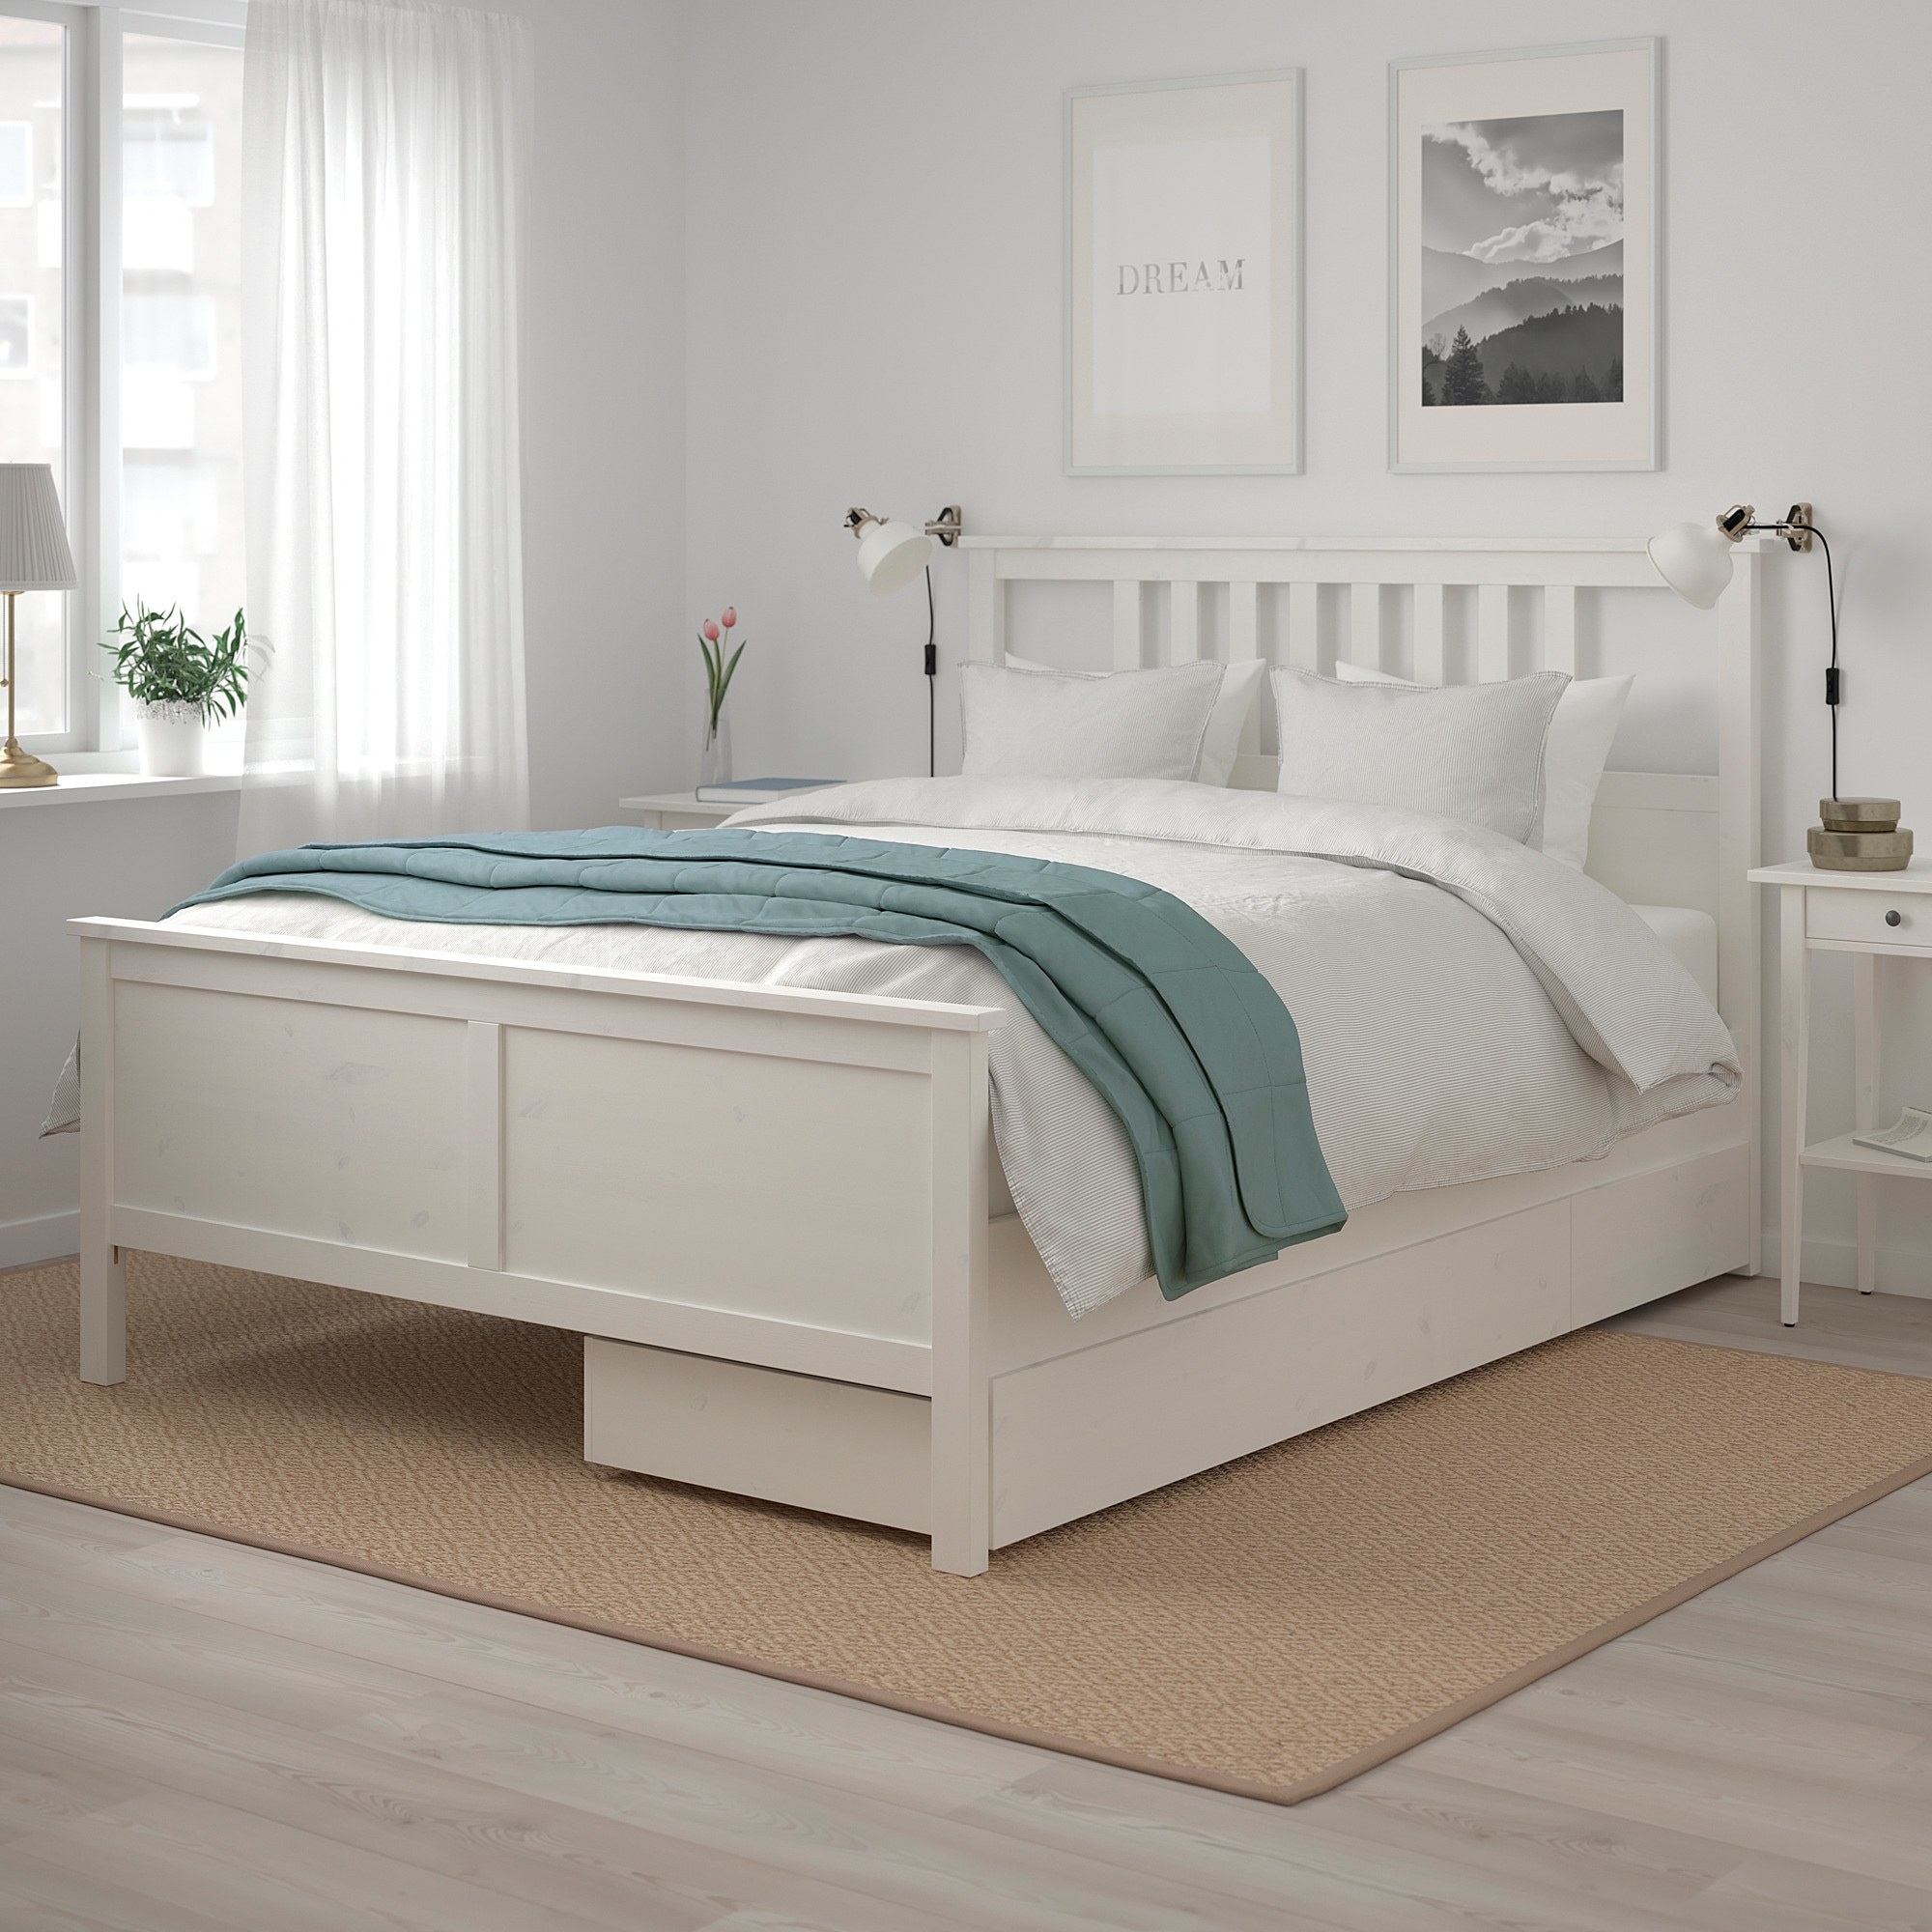 27 Bed Frames That Only Look, All White Bed Frame